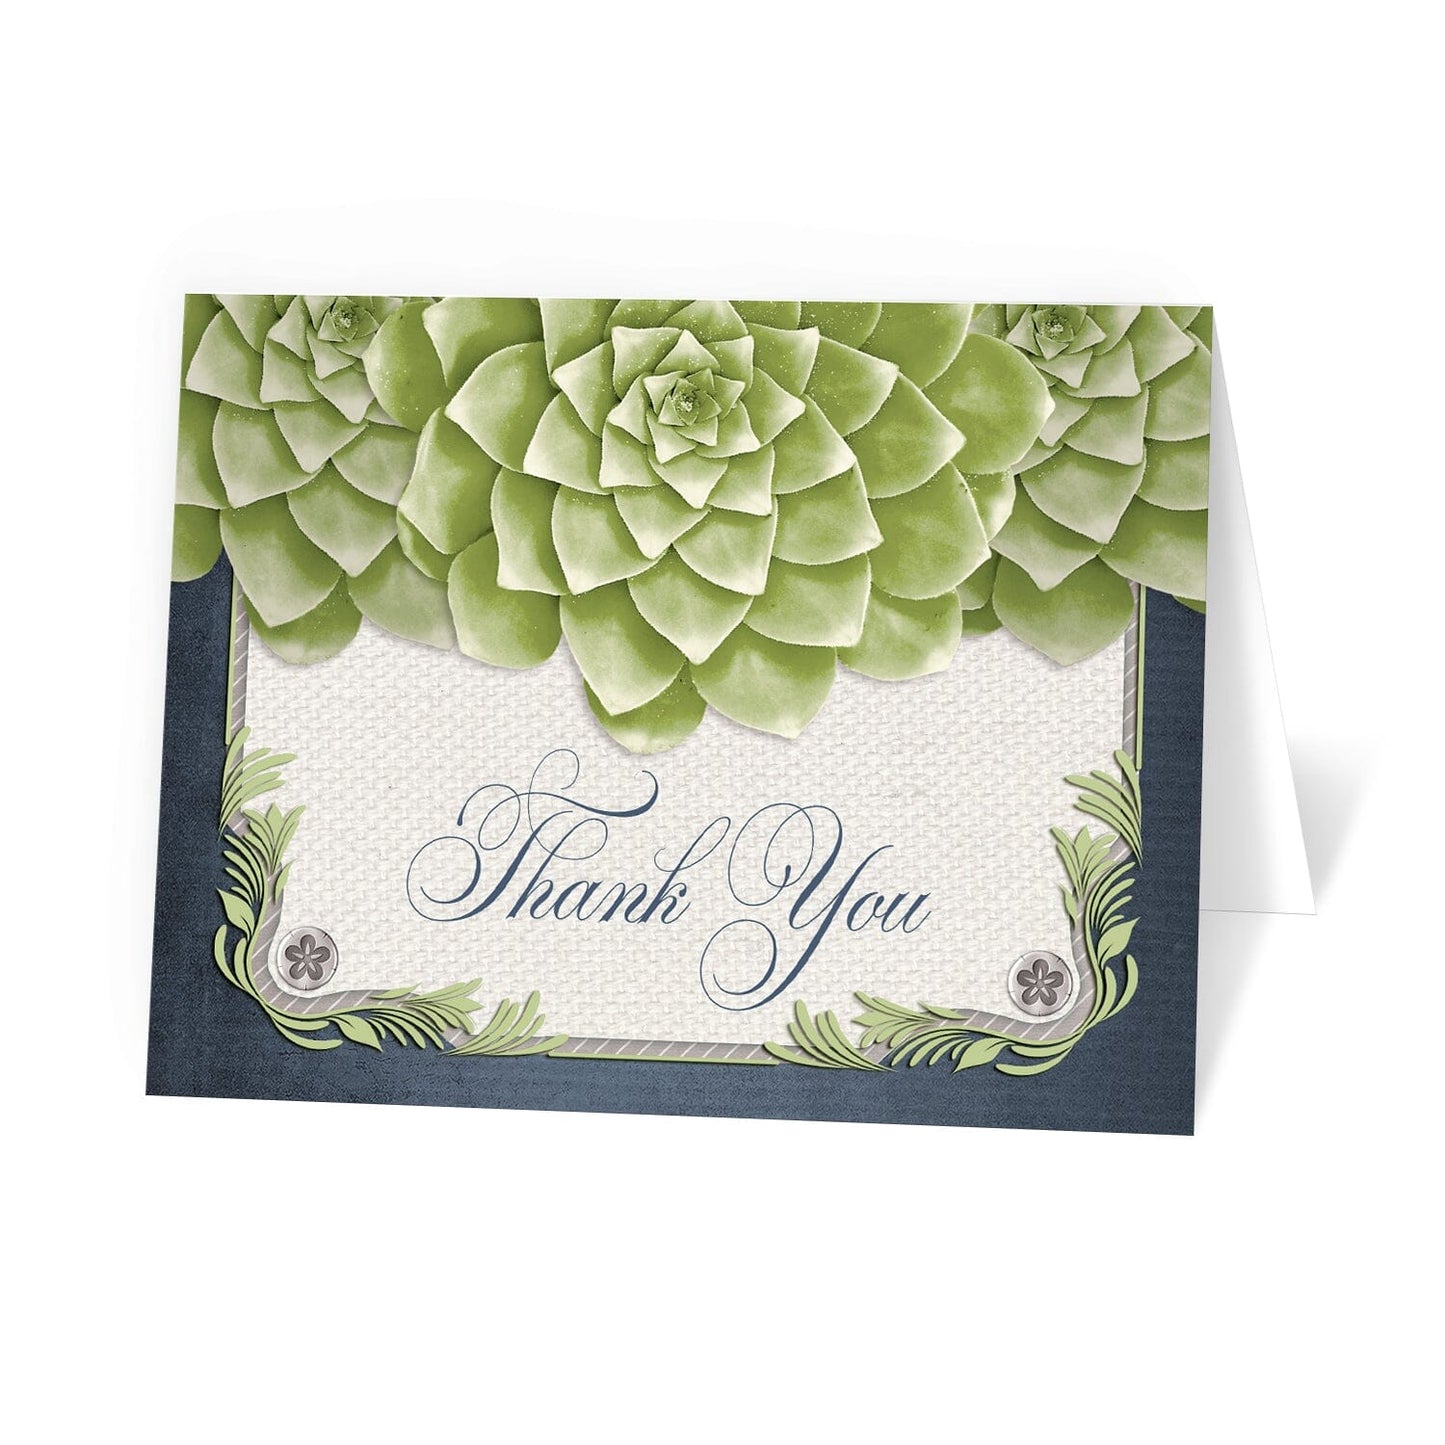 Rustic Succulent Garden Navy Thank You Cards at Artistically Invited.